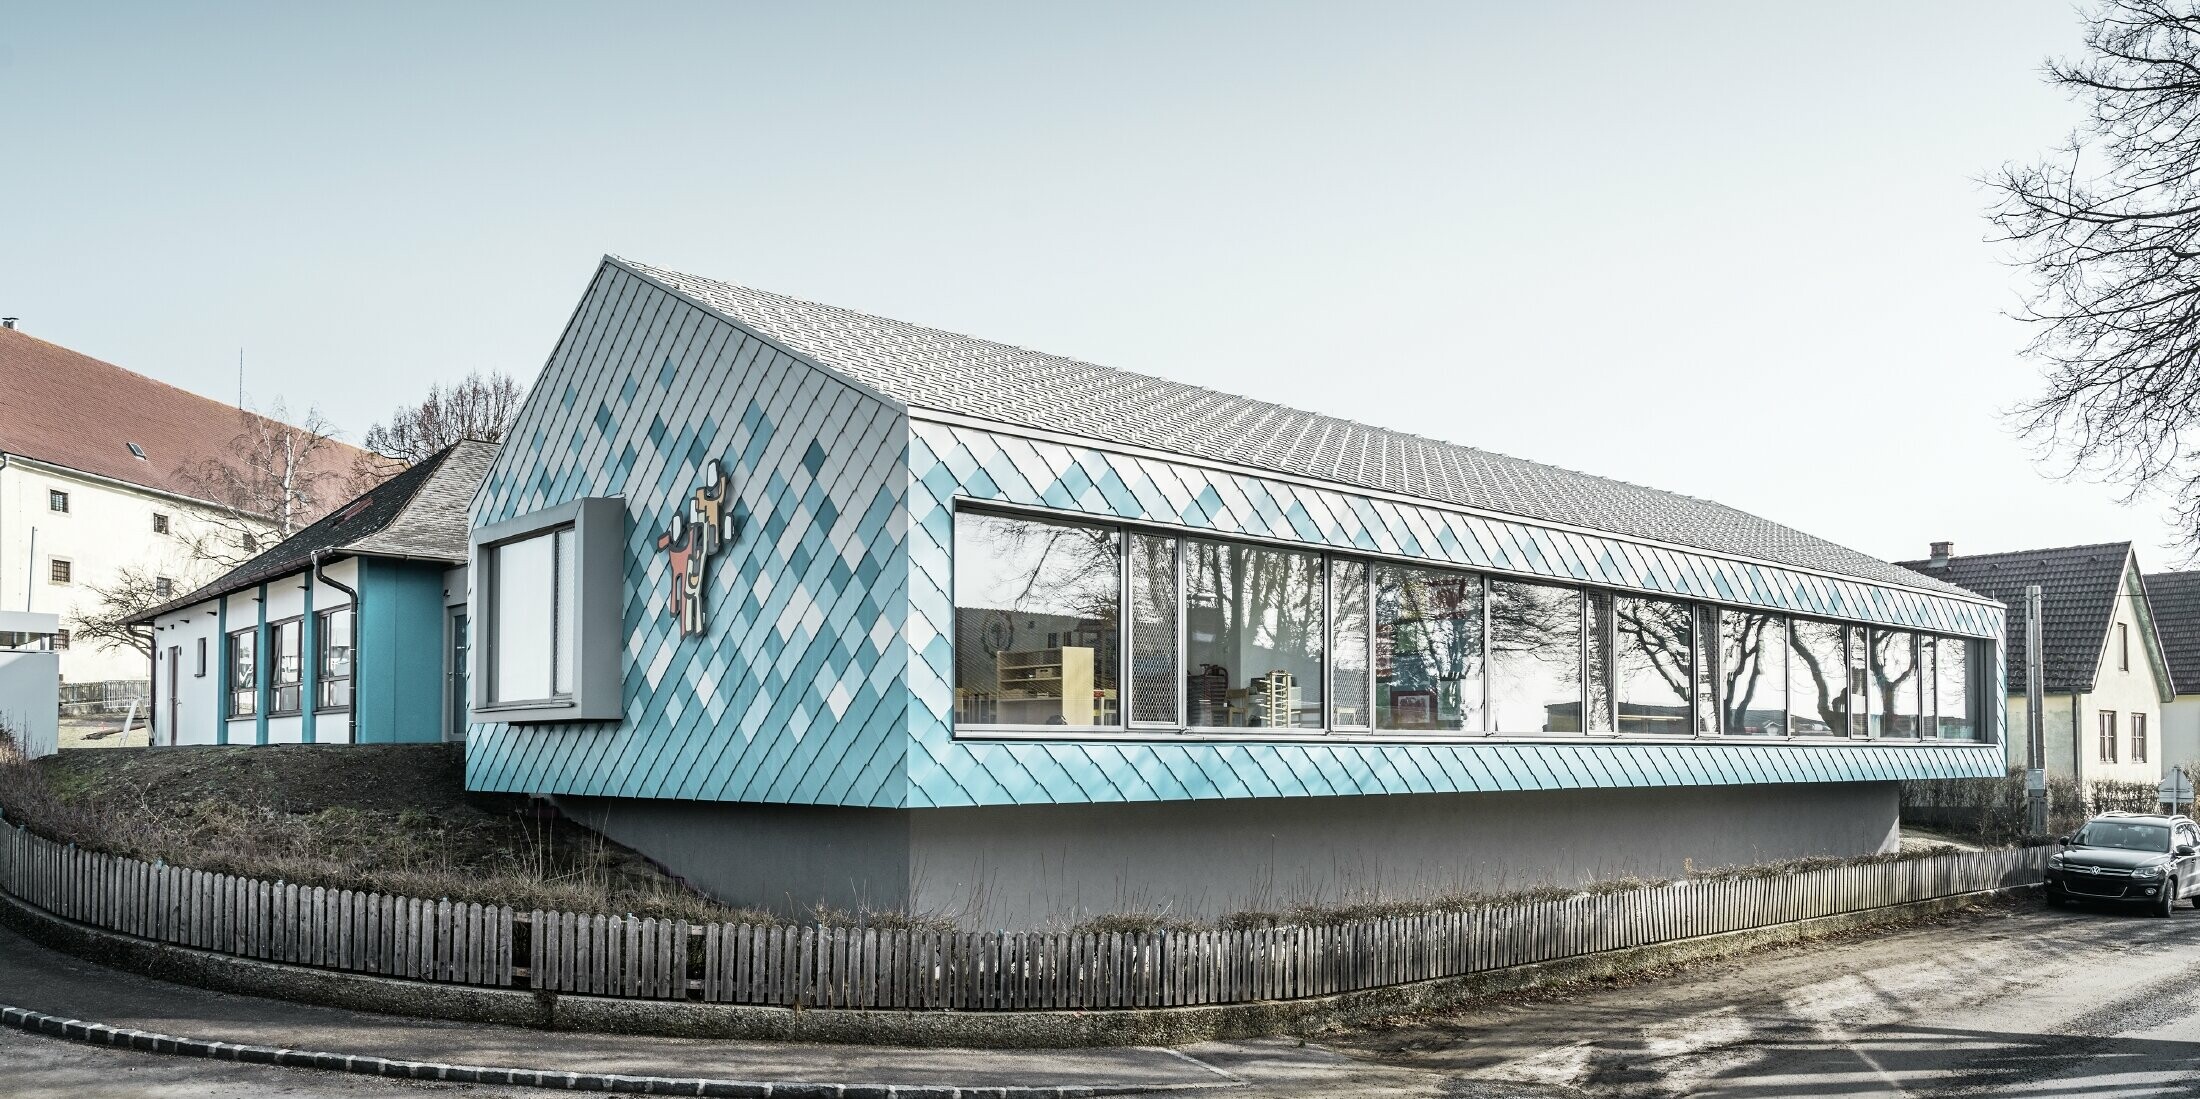 For the façade design of the kindergarten, the PREFA aluminium rhomboid façade tile 29 was chosen in the colours pure white, light blue and turquoise. These wereinstalled in a colour gradient (white on top and blue below).